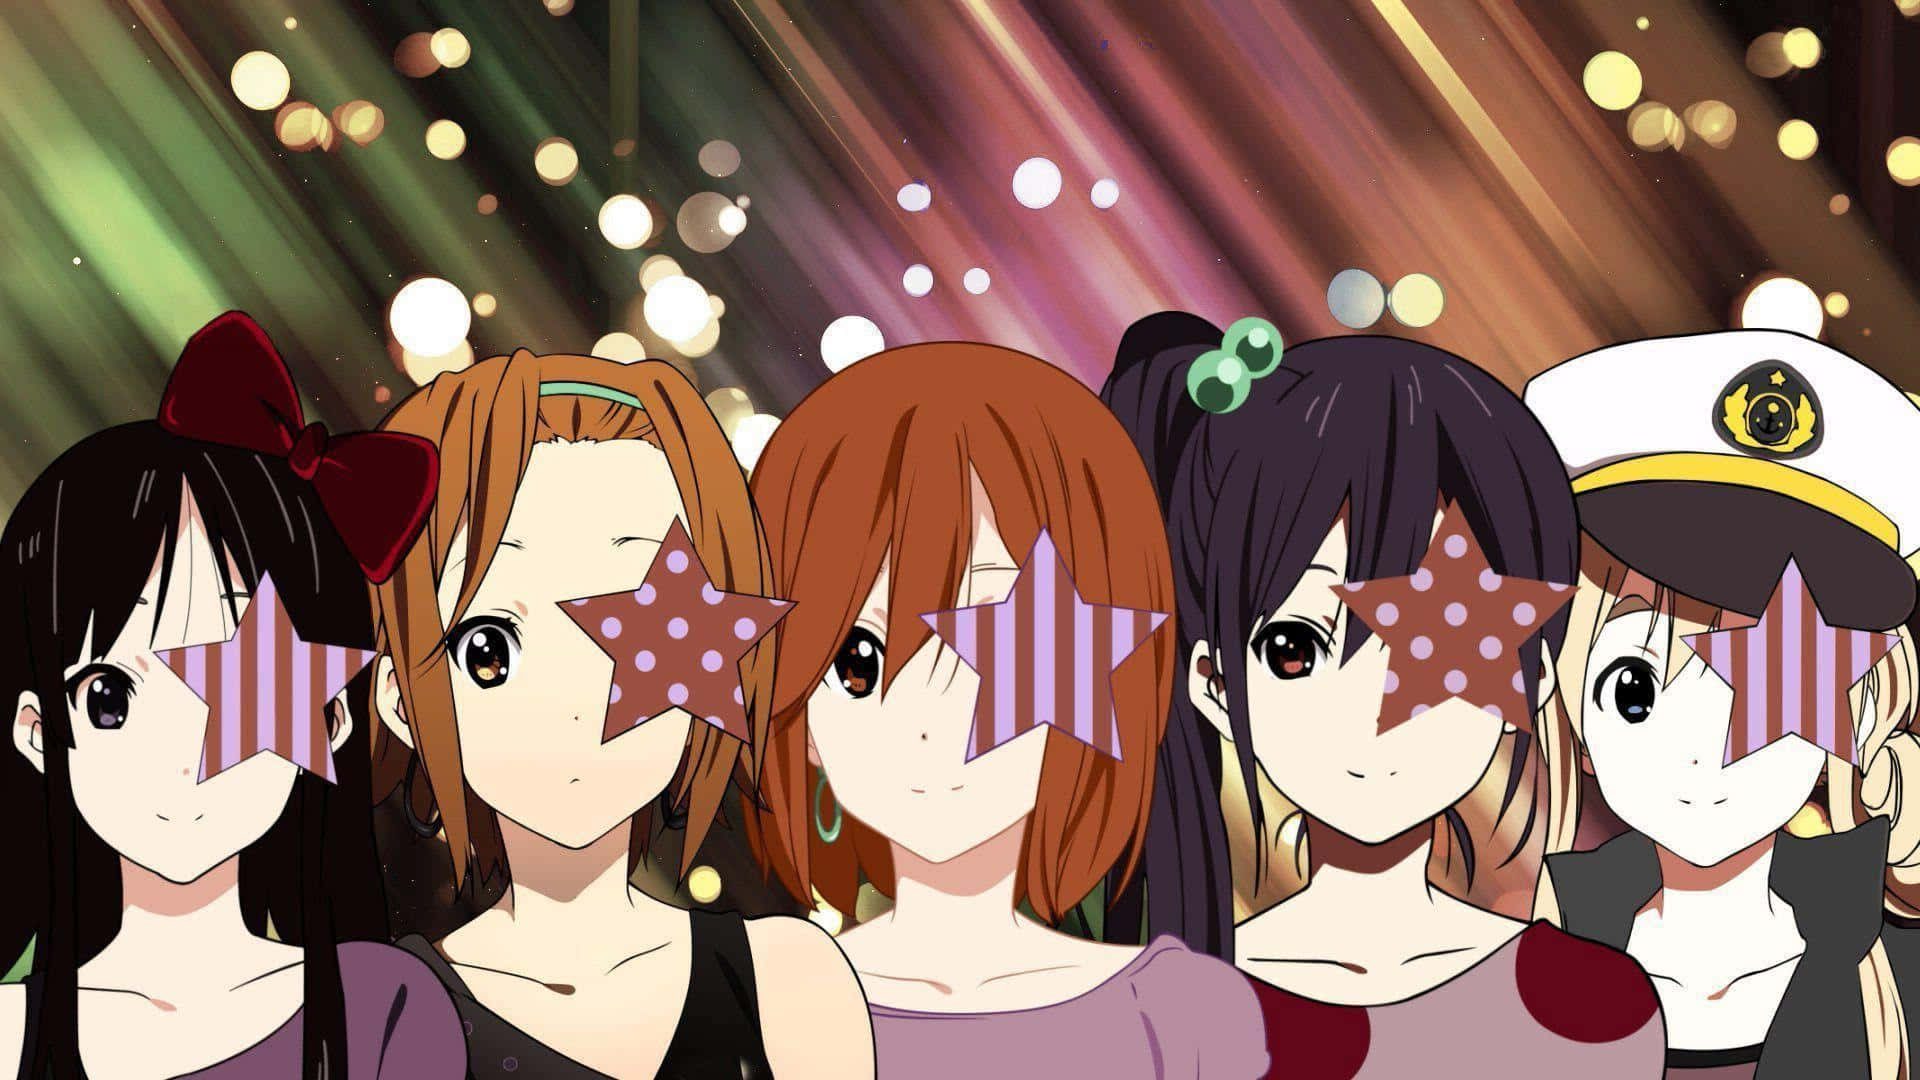 A Group Of Anime Girls With Stars On Their Faces